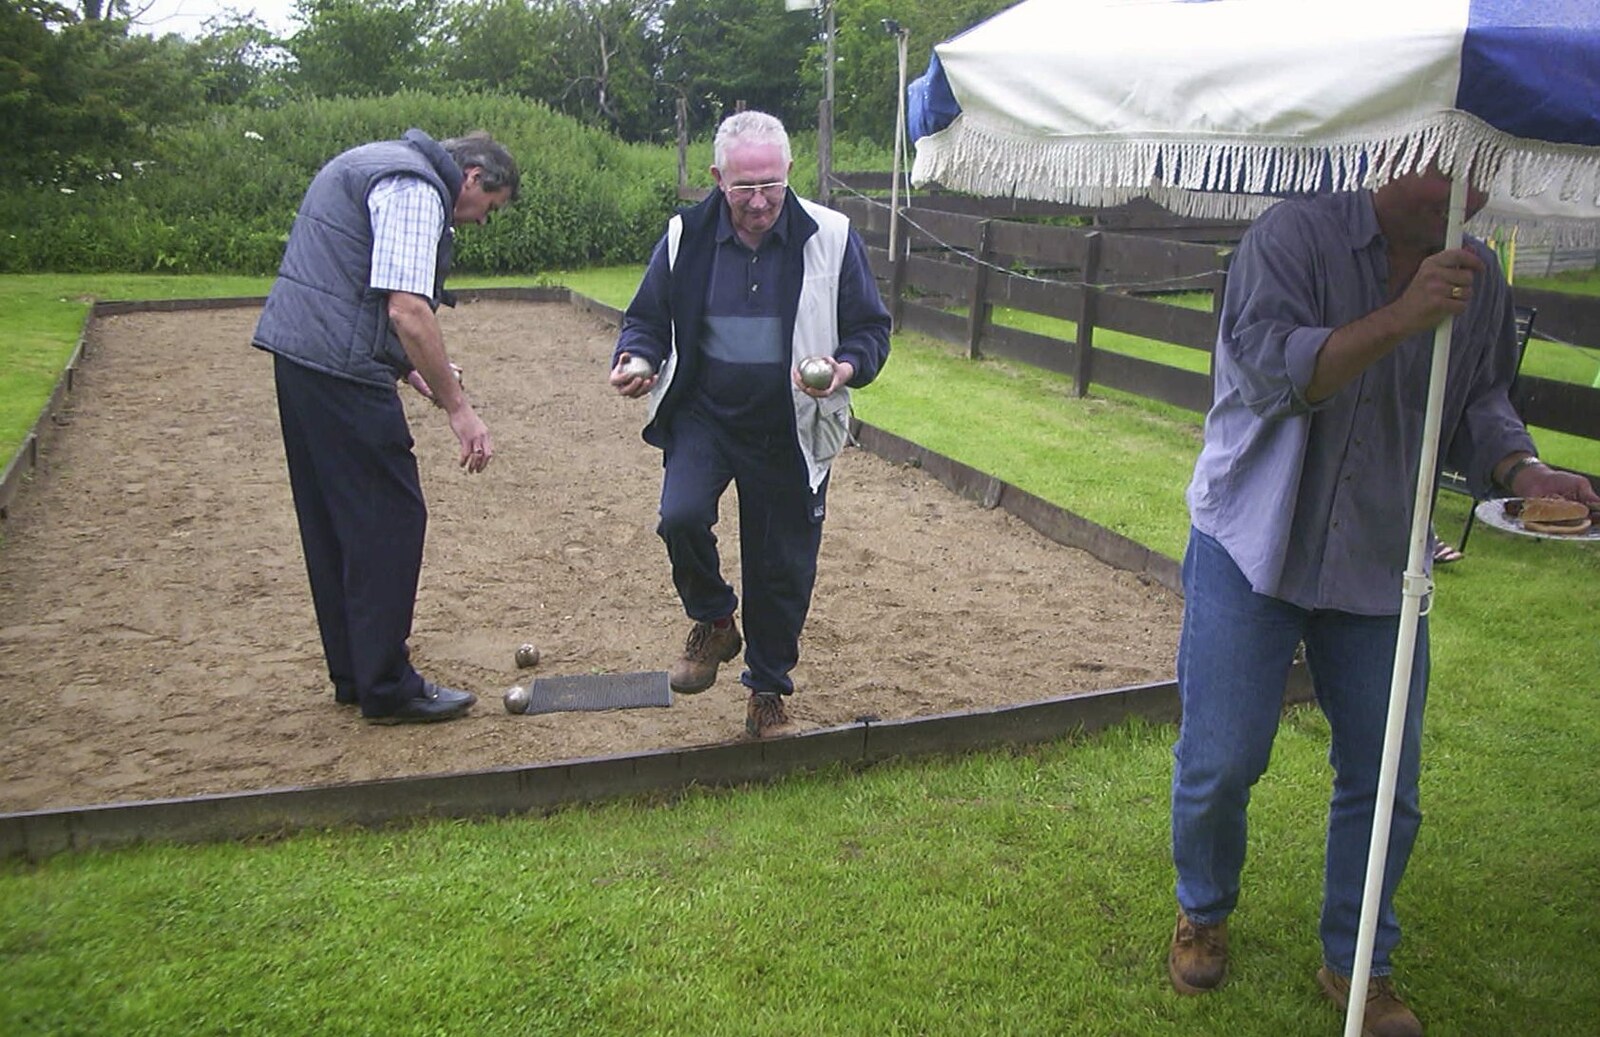 A Rainy Barbeque at the Swan Inn, Brome, Suffolk - 15th June 2002: Alan and Bomber Langdon play Petanque